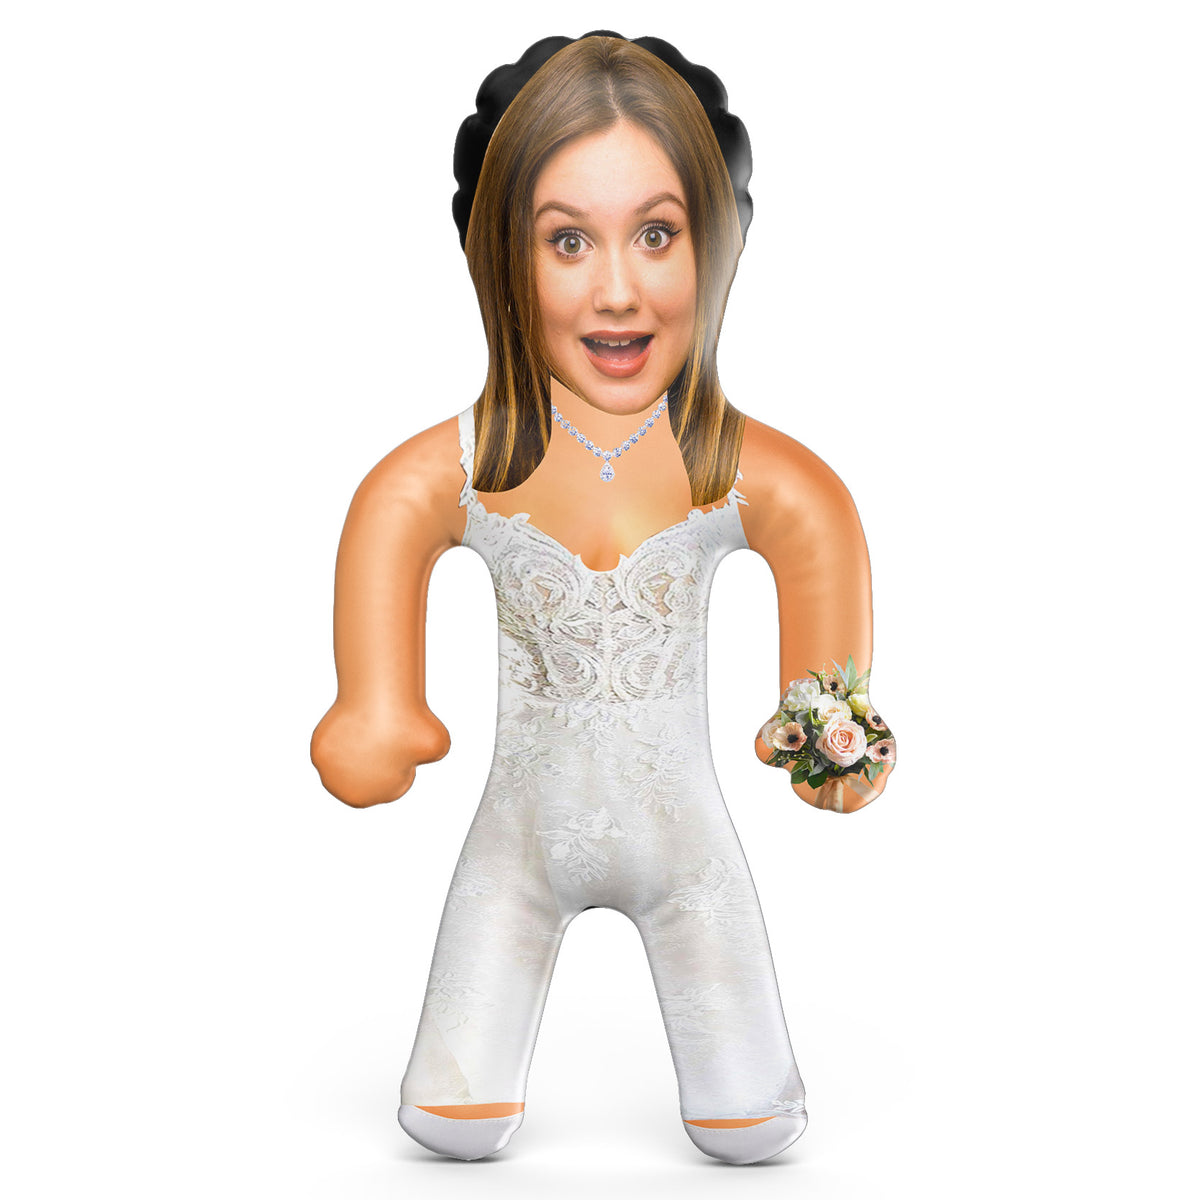 Bride Inflatable Doll